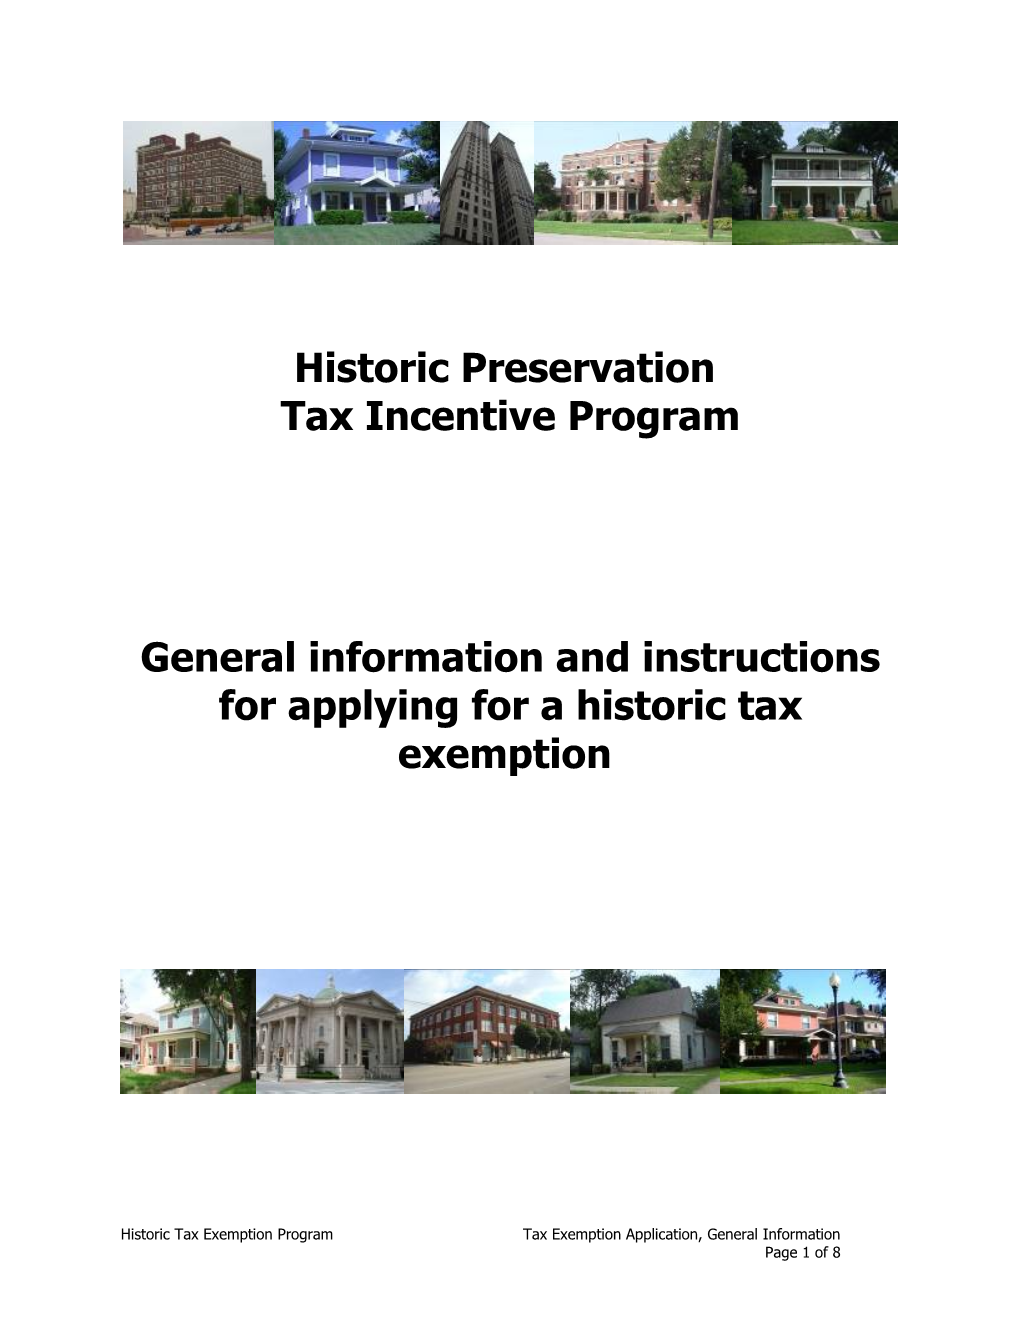 General Information and Instructions for Applying for a Historic Tax Exemption